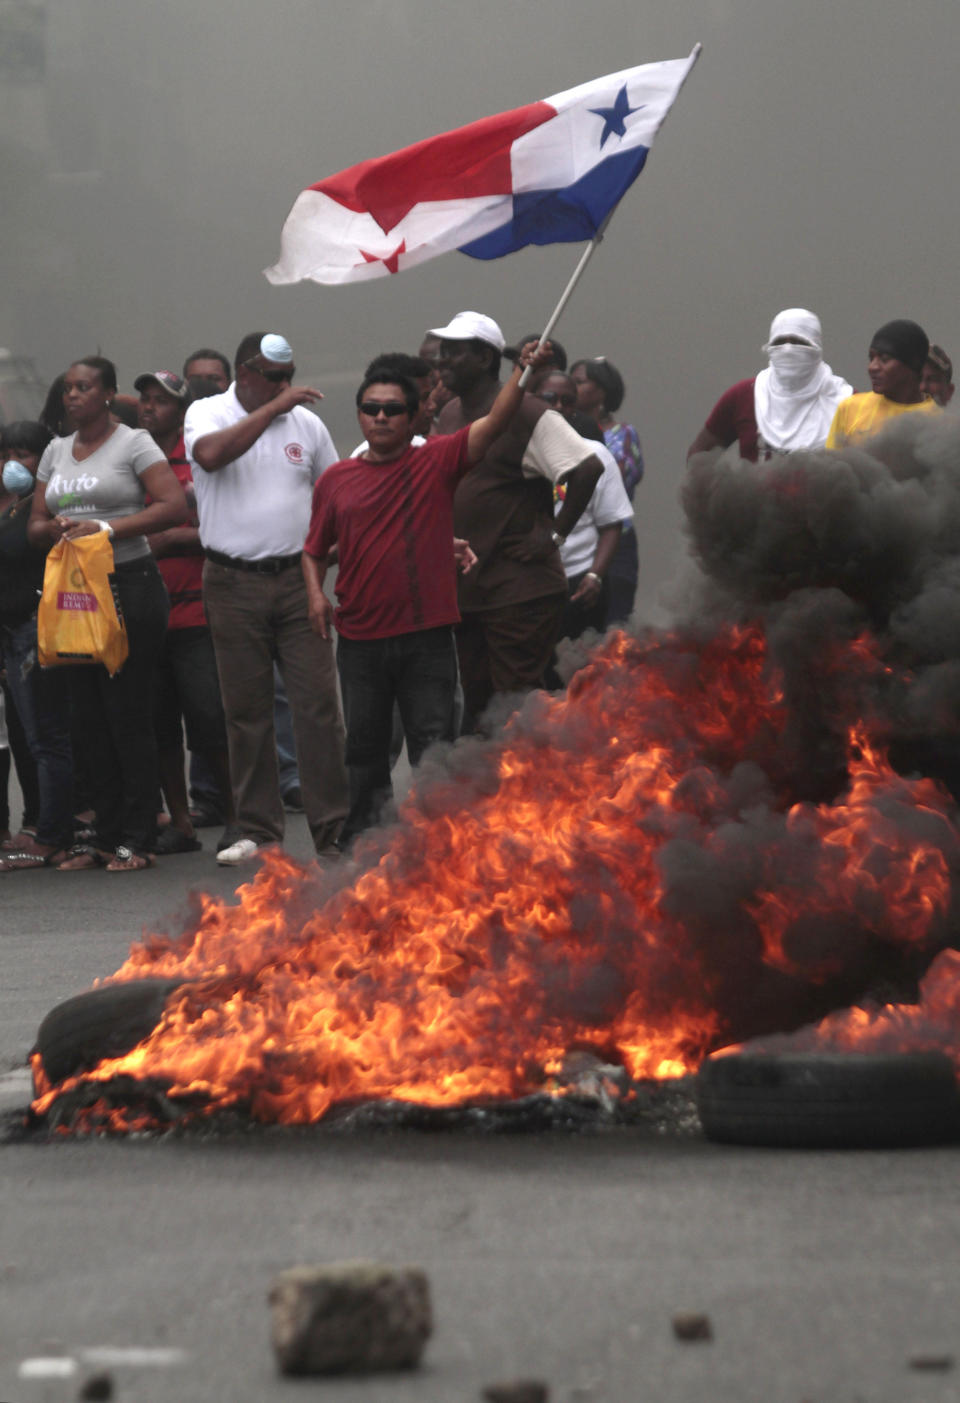 A demonstrator waves a Panamanian flag at a burning road block as he and others protest in Colon, Panama, Friday, Oct. 19, 2012. Demonstrators protested over a new law allowing the sale of state-owned land in the duty-free zone next to the Panama Canal. Protesters said the land is already being rented and it makes no sense to sell it. They said the government should instead raise the rent and invest the money in Colon, a poor and violent city. (AP Photo)